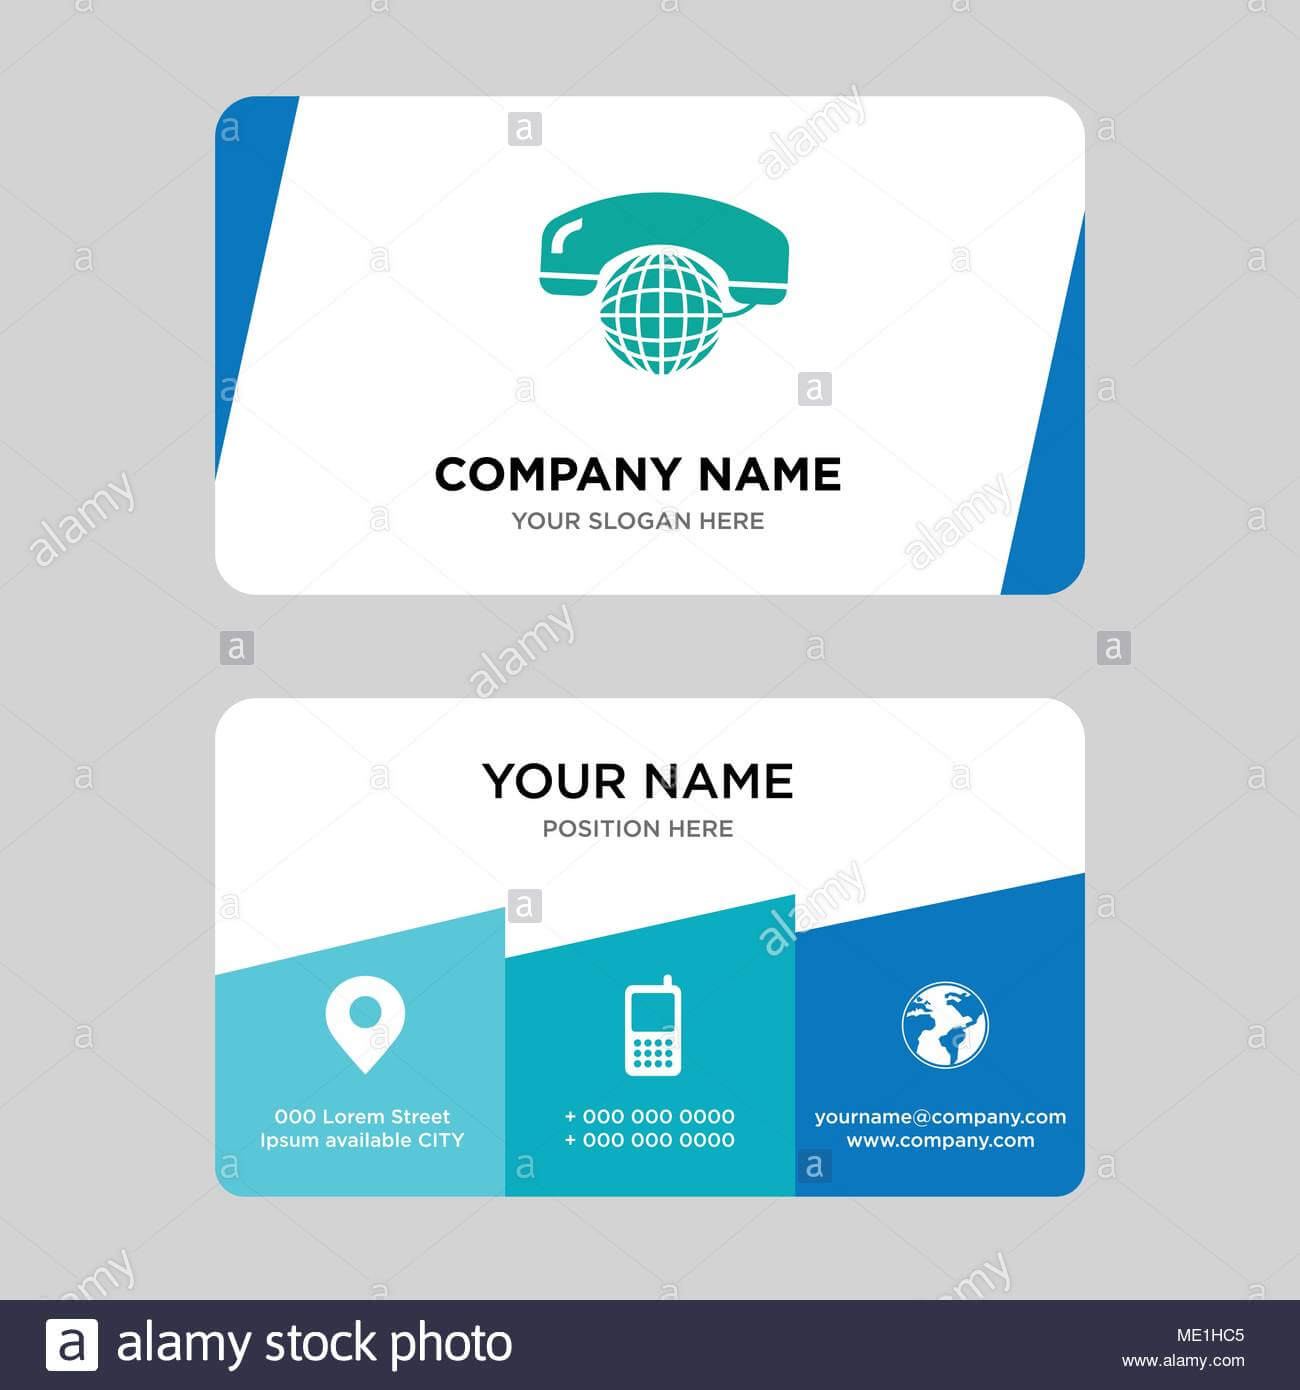 International Calling Service Business Card Design Template Intended For Call Card Templates